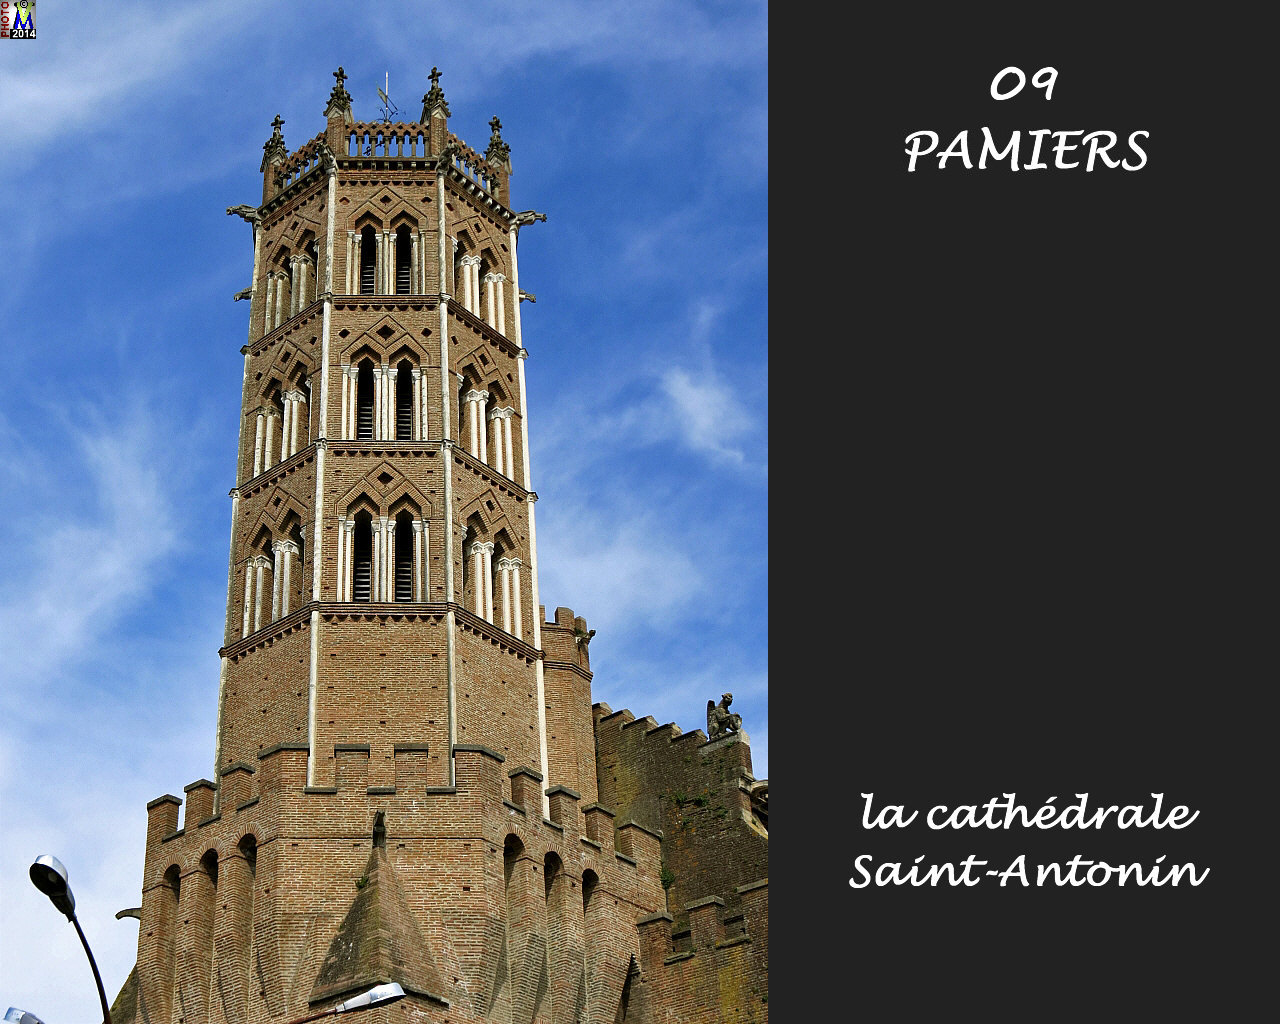 09PAMIERS_cathedrale_110.jpg